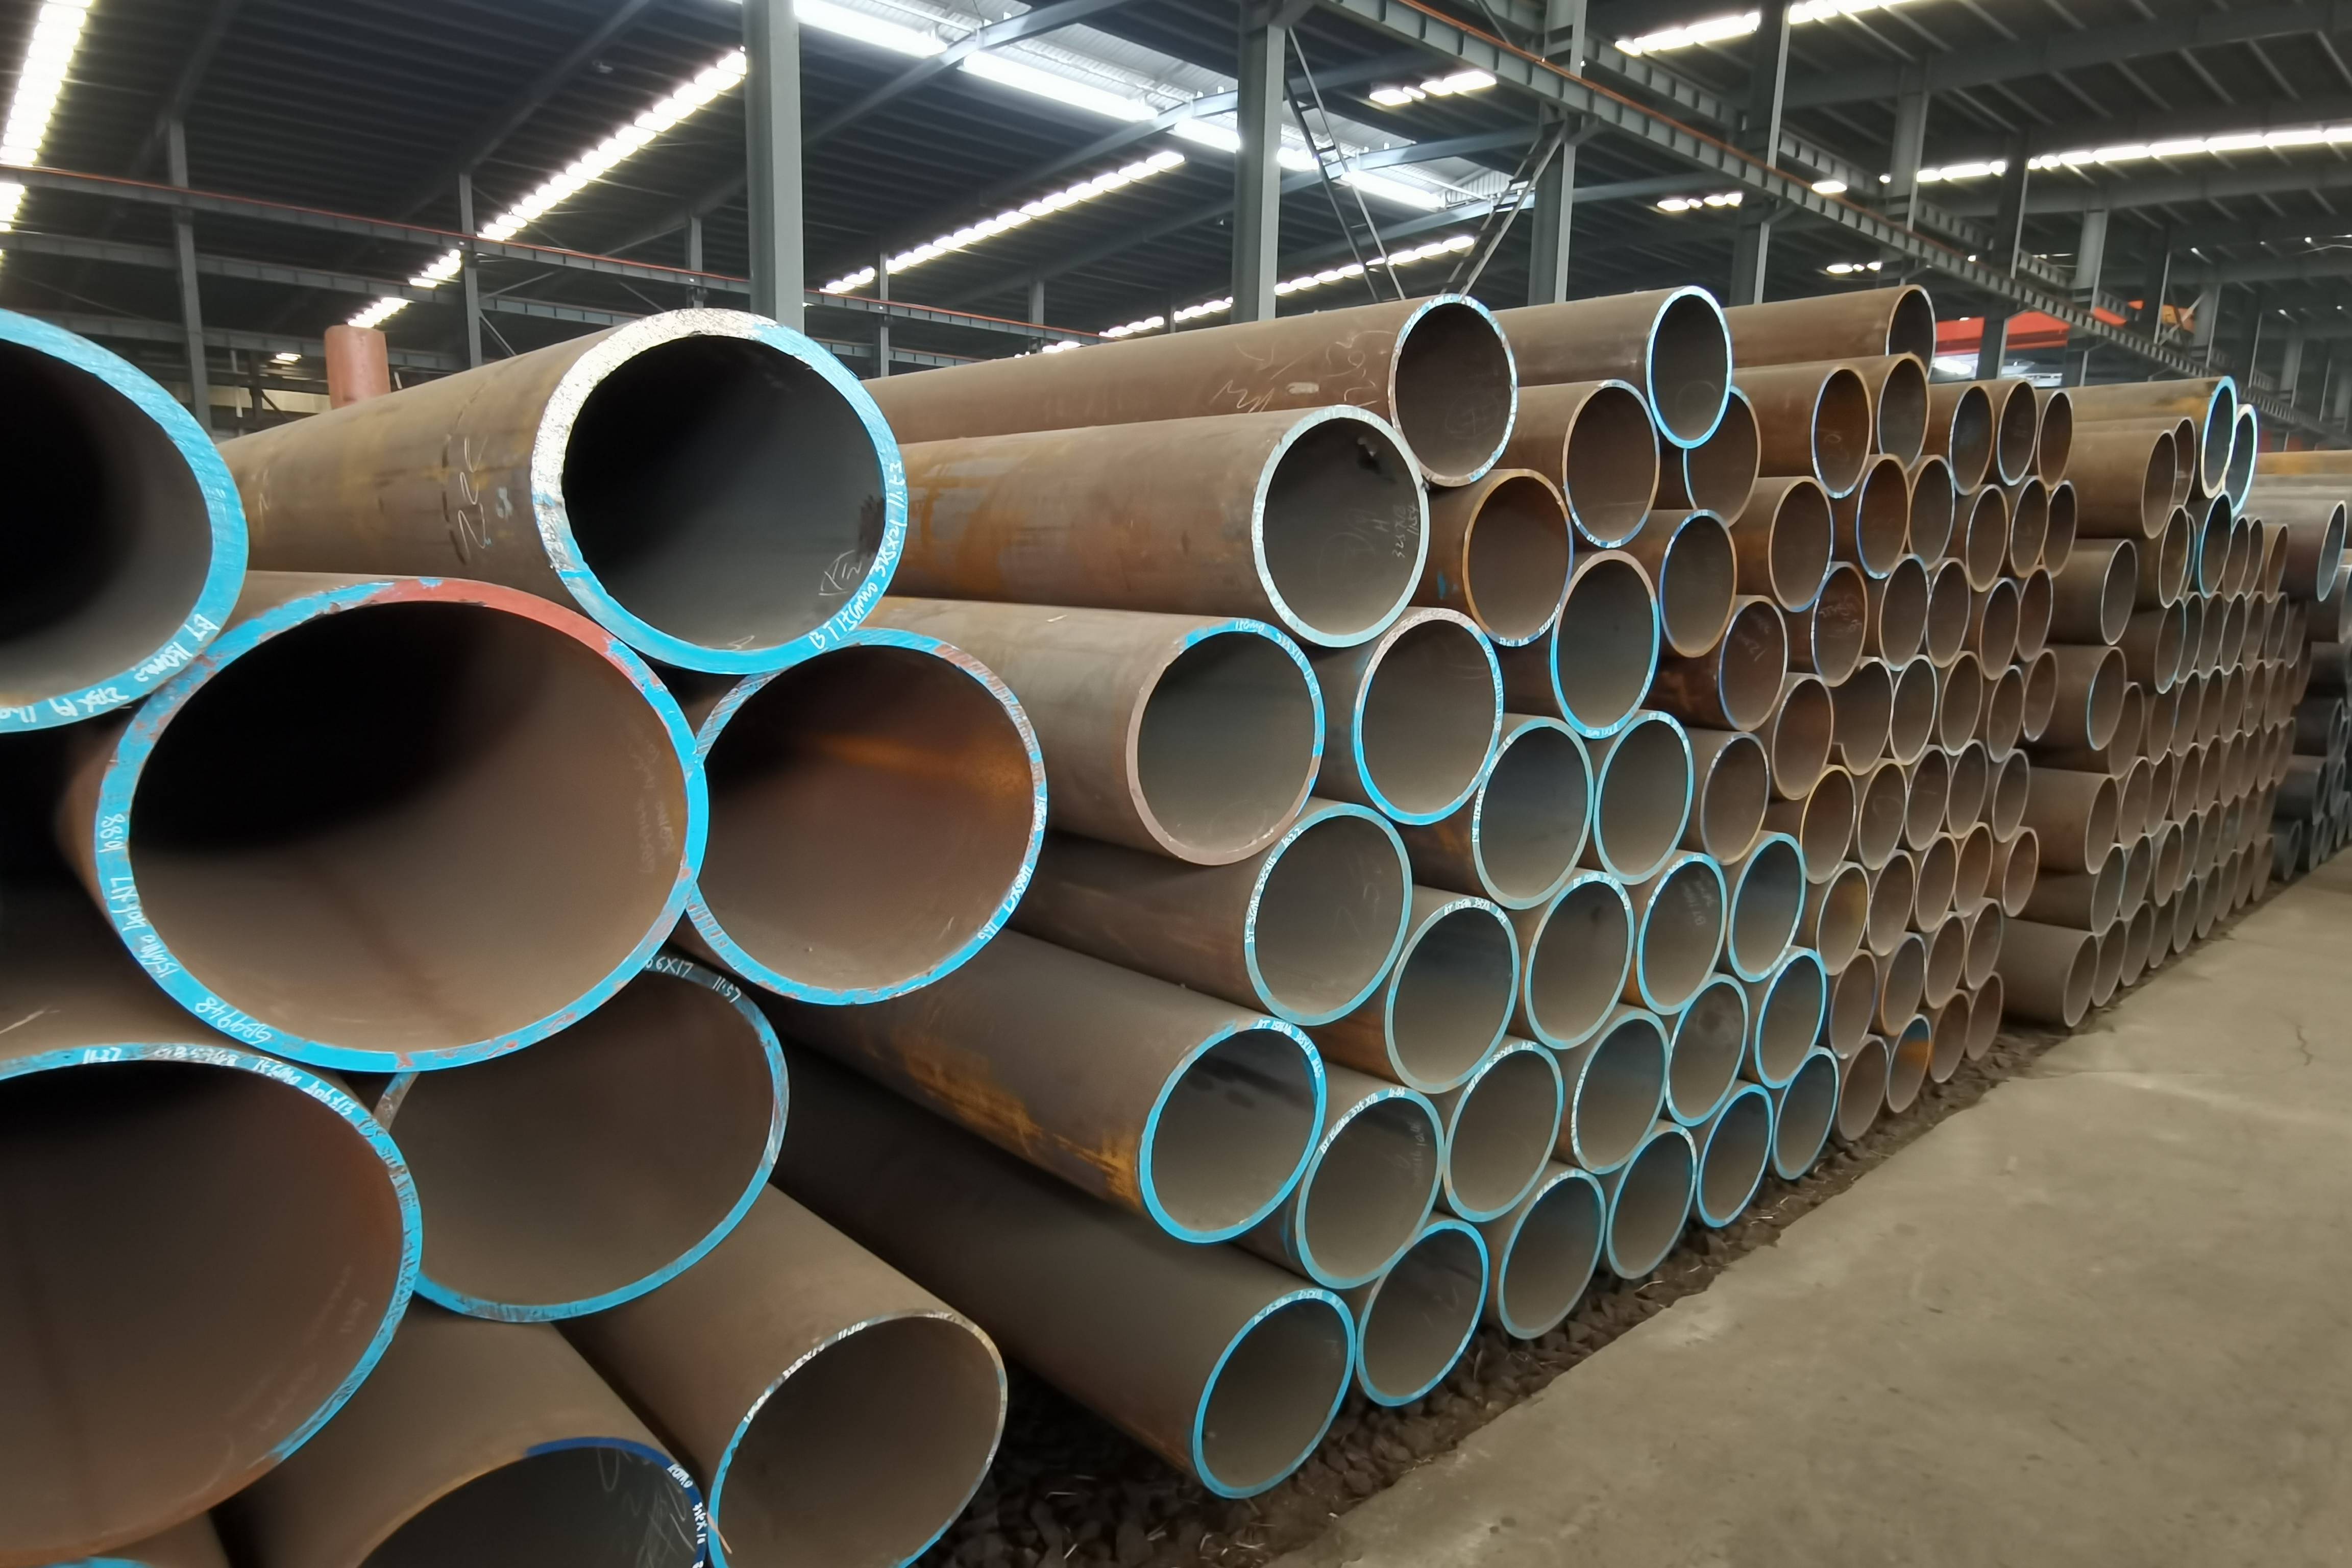 Part 2 of applicable standards for seamless pipes